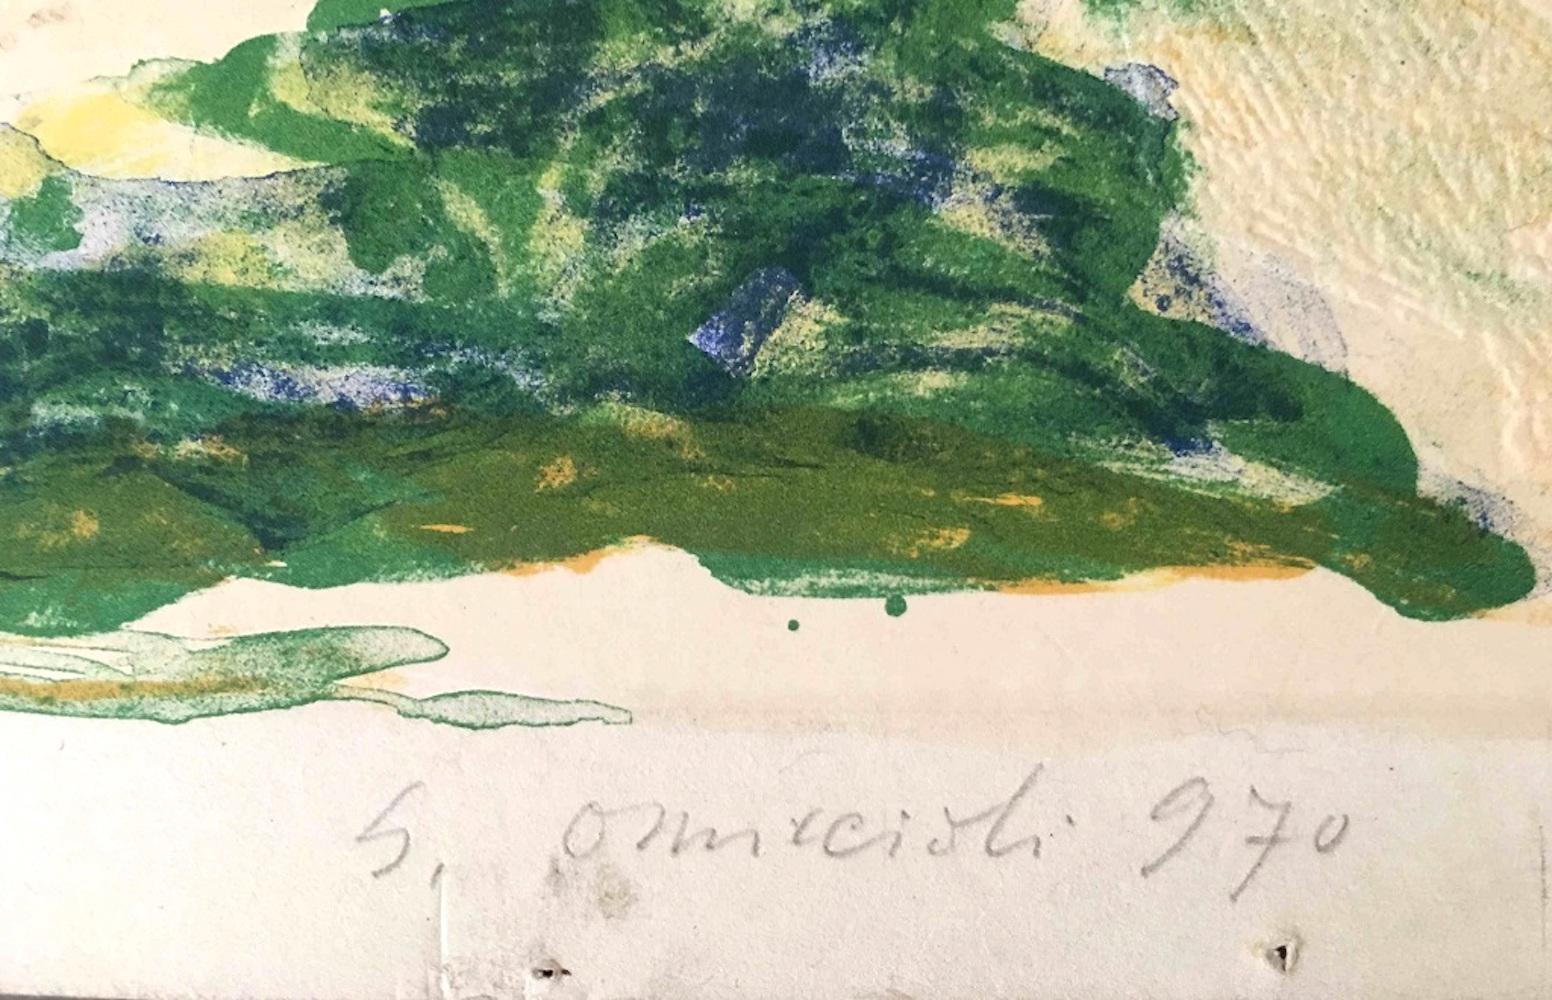 Untitled is a beautiful original watercolor on cardboard, realized by the Italian artist Giovanni Omiccioli (Rome, 1901-1975) in 1970.

Signed and dated in pencil. 

A delicate landscape realized with incredible draftsmanship.

In very good